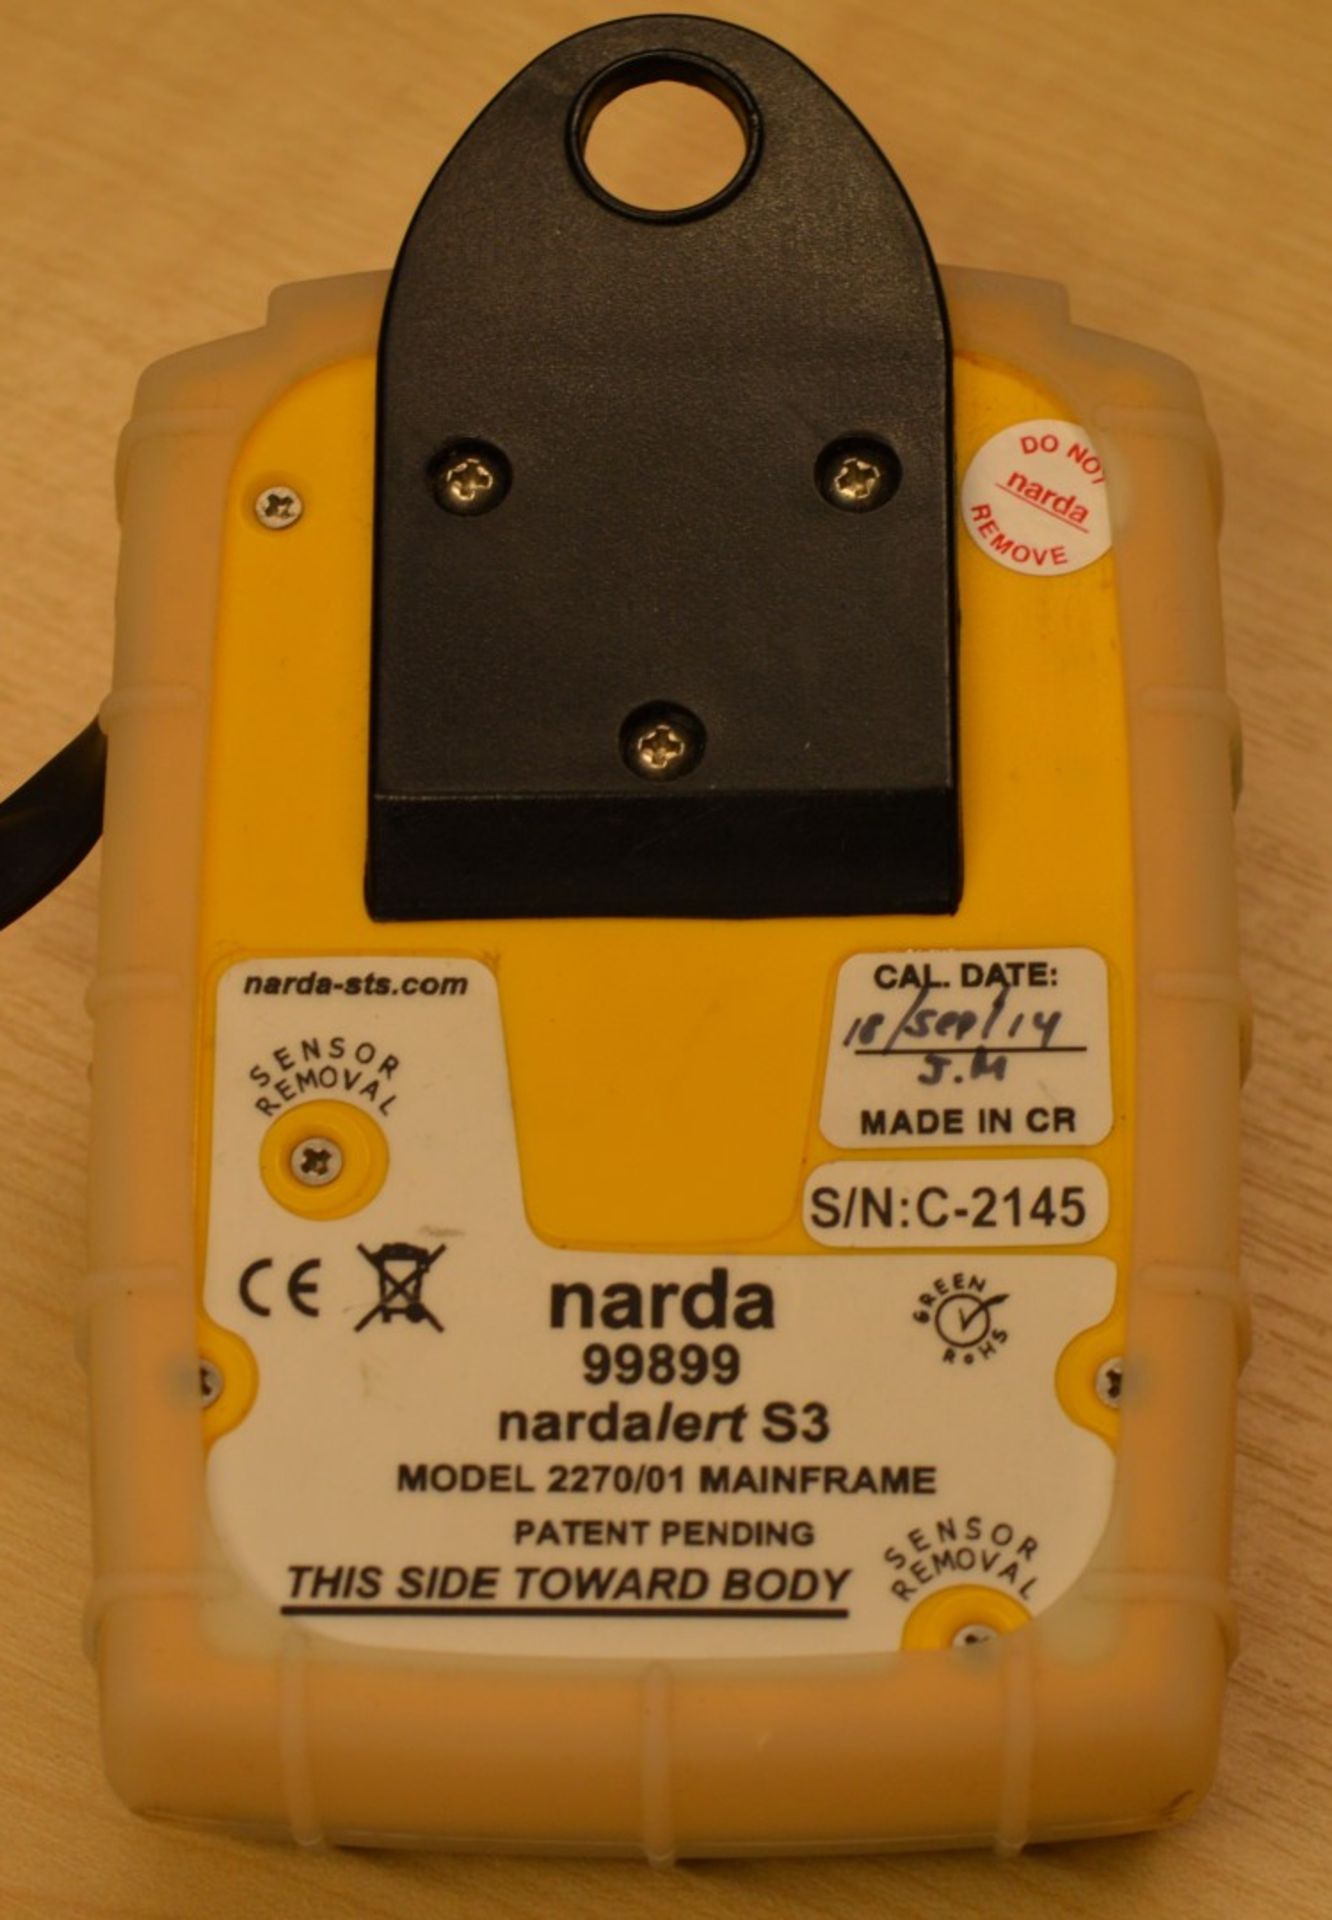 1 x Nardalert S3 None Ionizing Radiation Monitor - Model 2270/01 Mainframe - Includes Carry Case, - Image 13 of 13